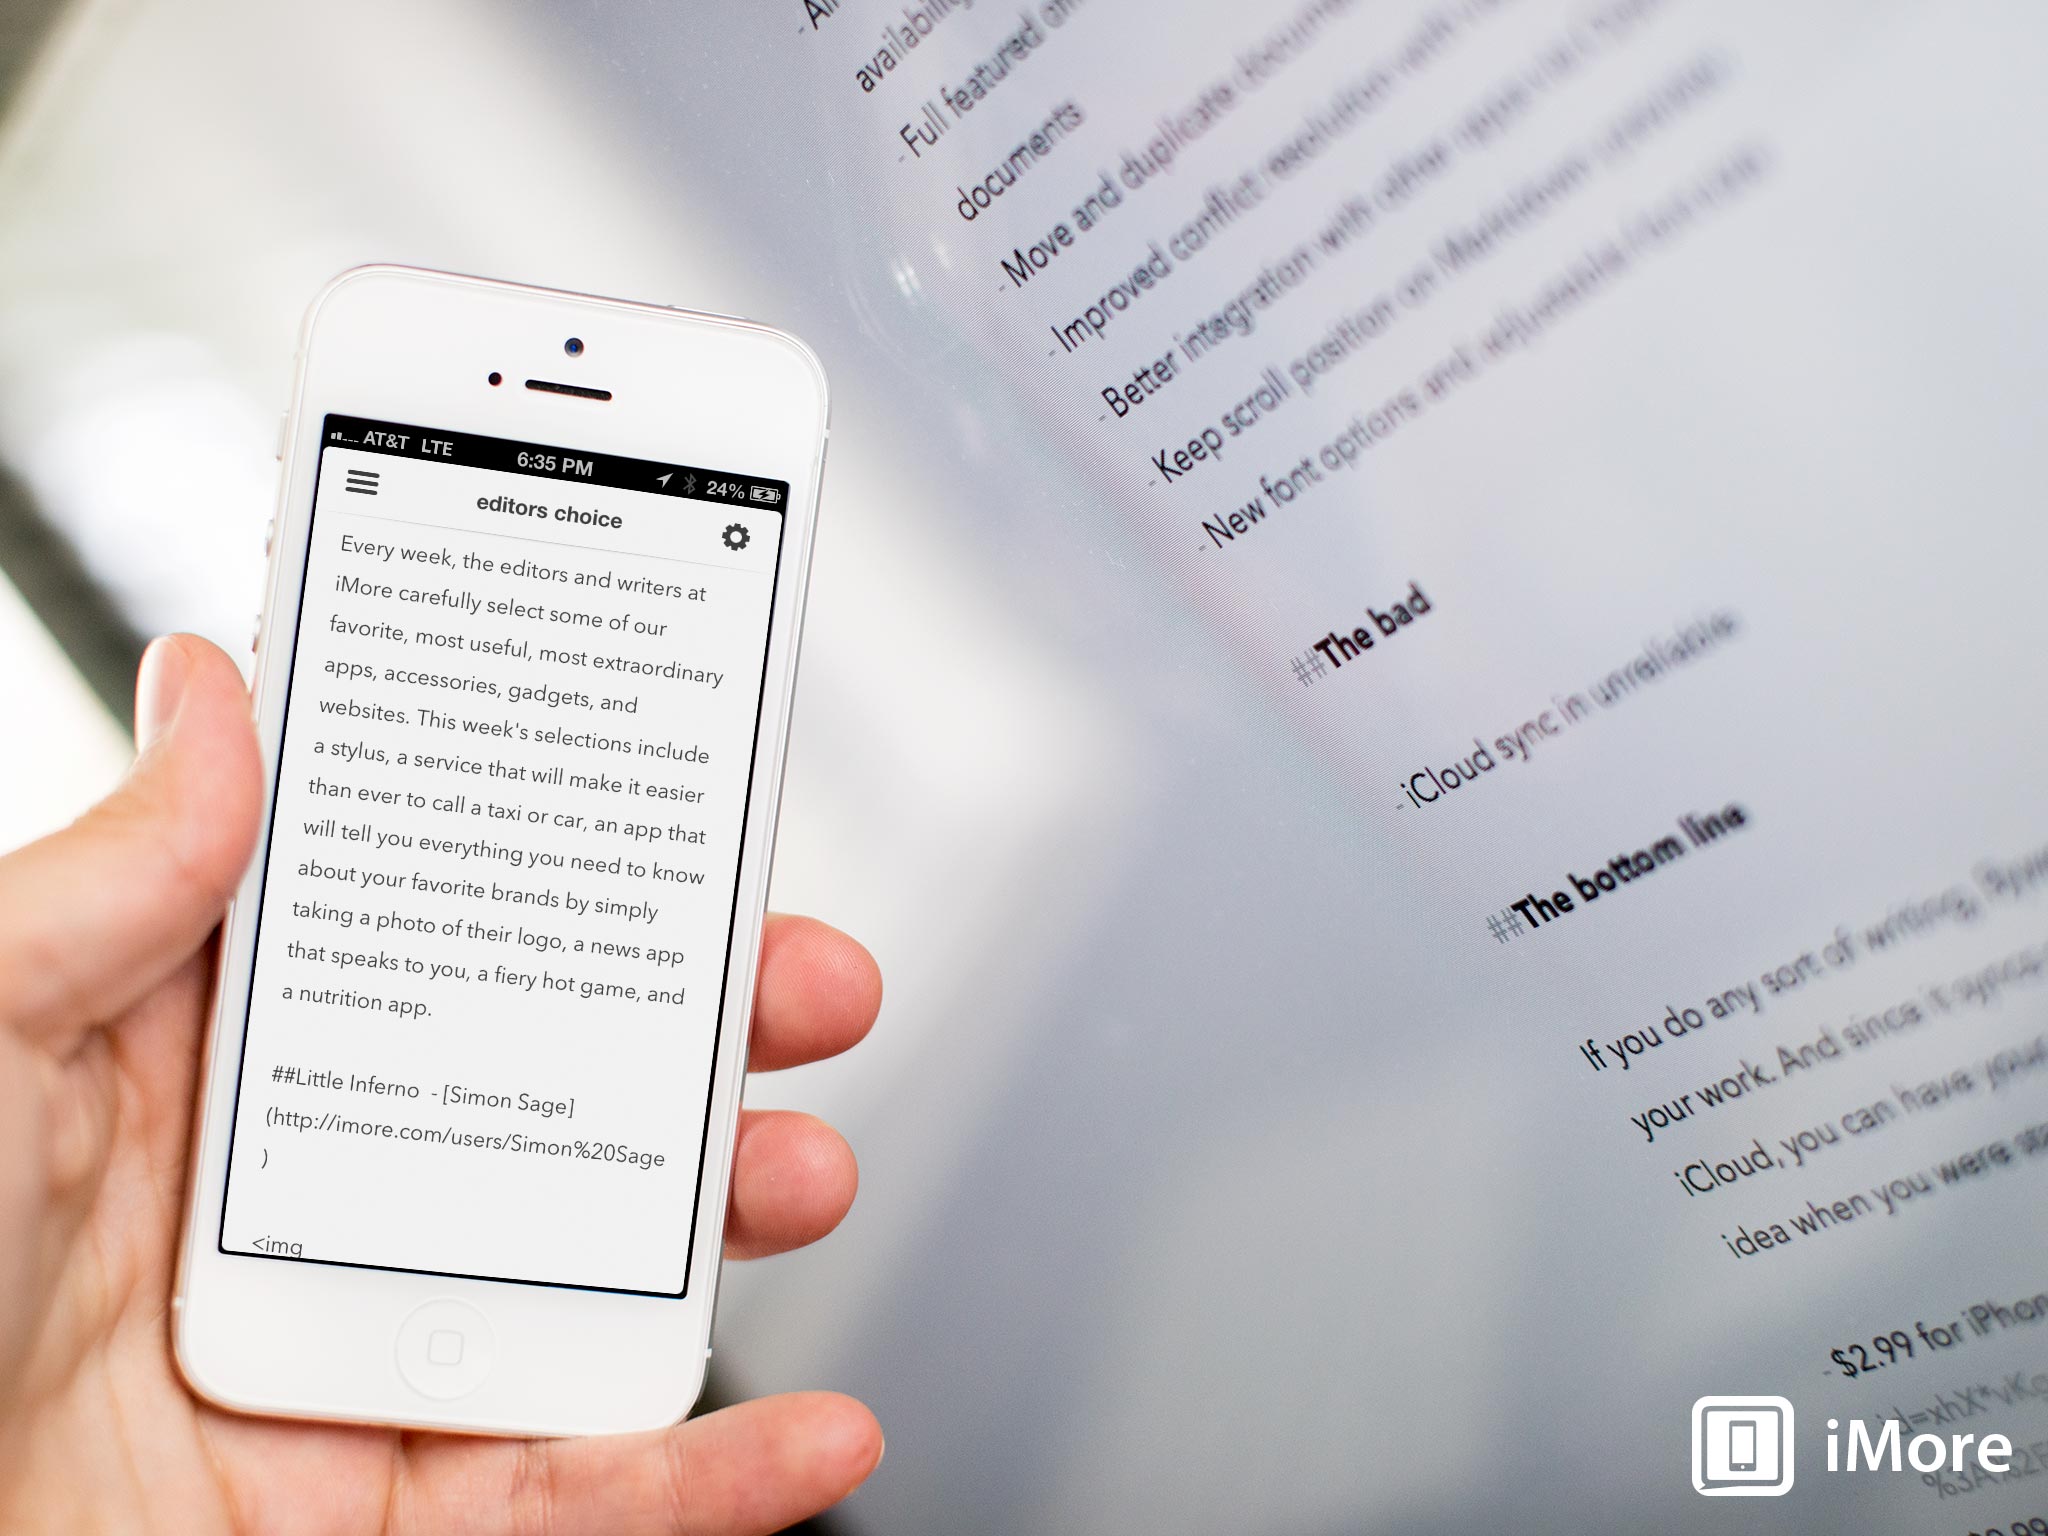 Byword 2 for iPhone, iPad and Mac review: New premium option allows publishing to WordPress, Tumblr, Evernote, and more